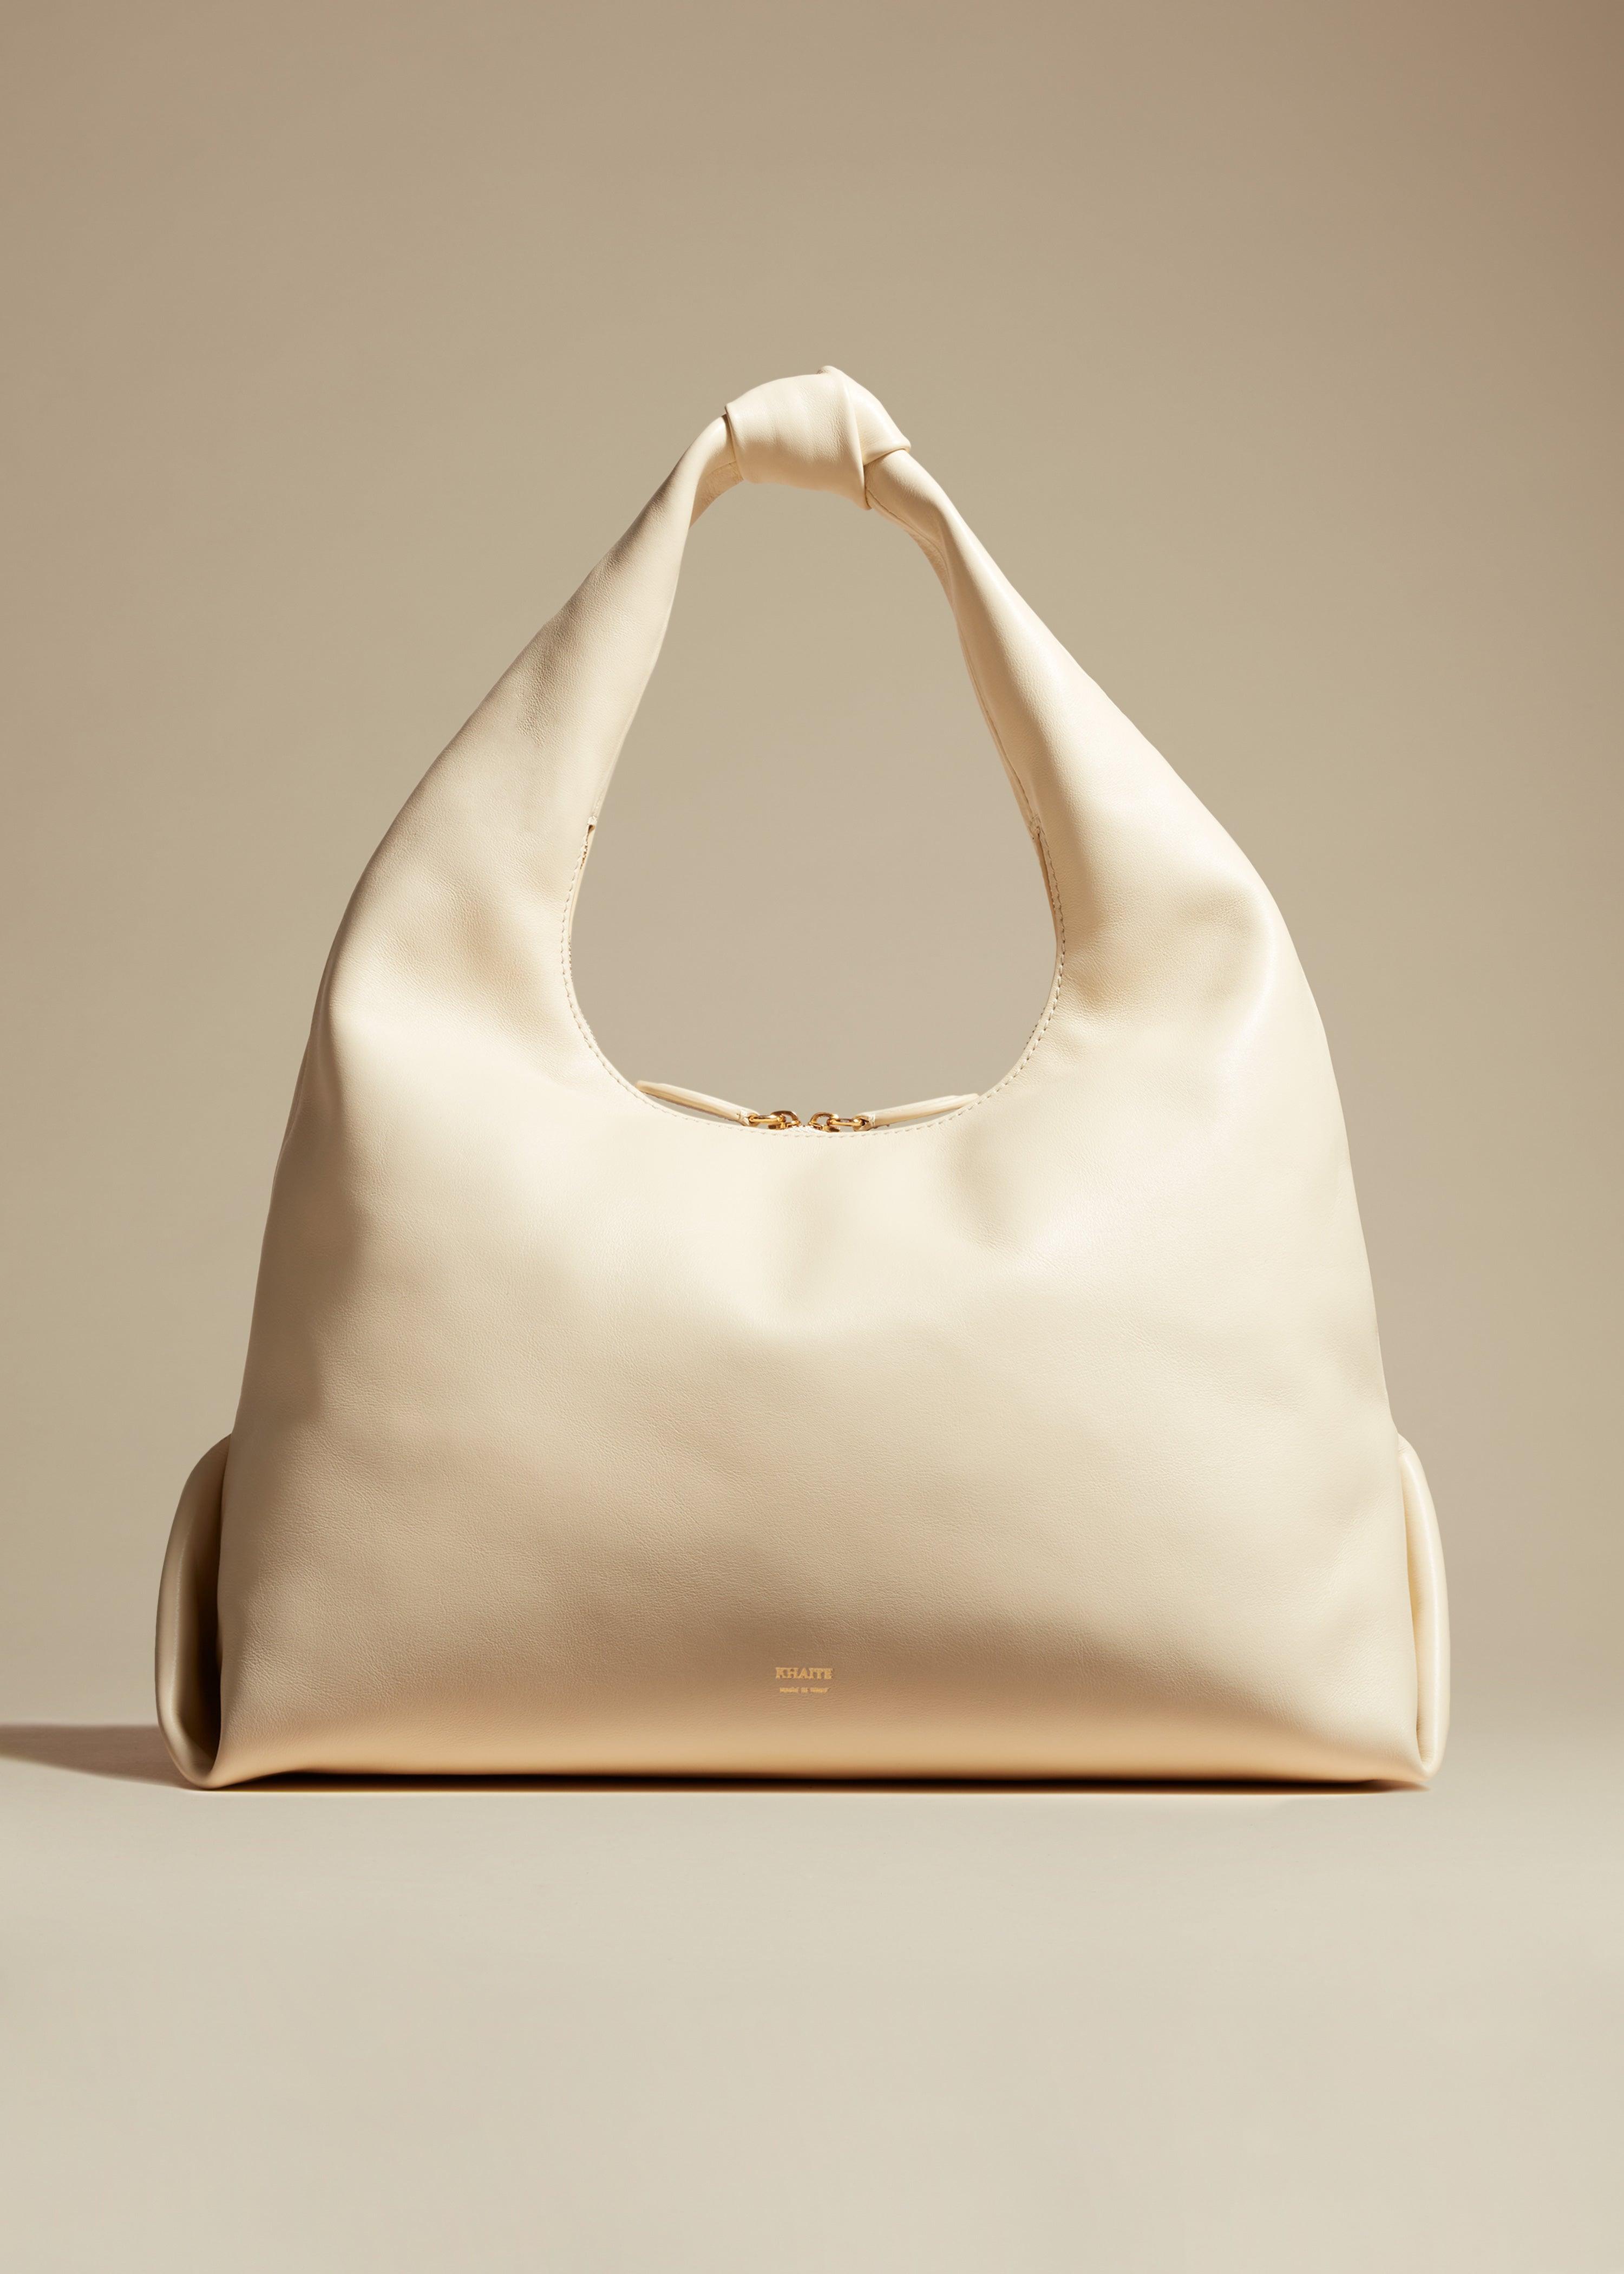 The Large Beatrice Hobo in Cream Leather - The Iconic Issue